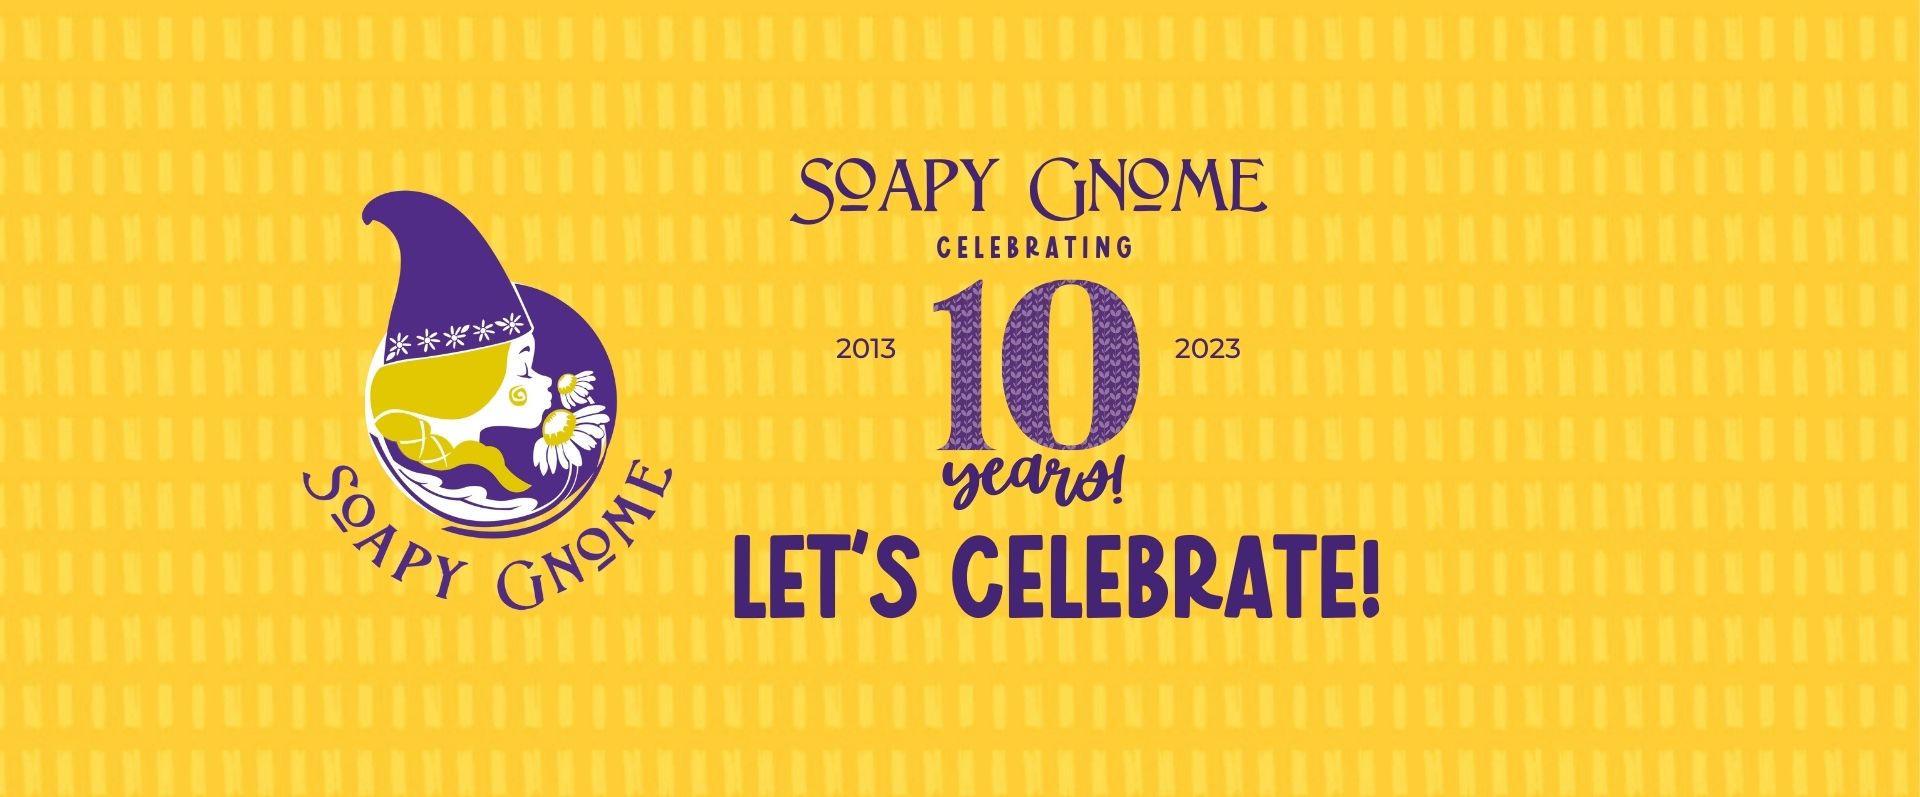 Soapy Gnome Celebrates Their 10 Year Anniversary!